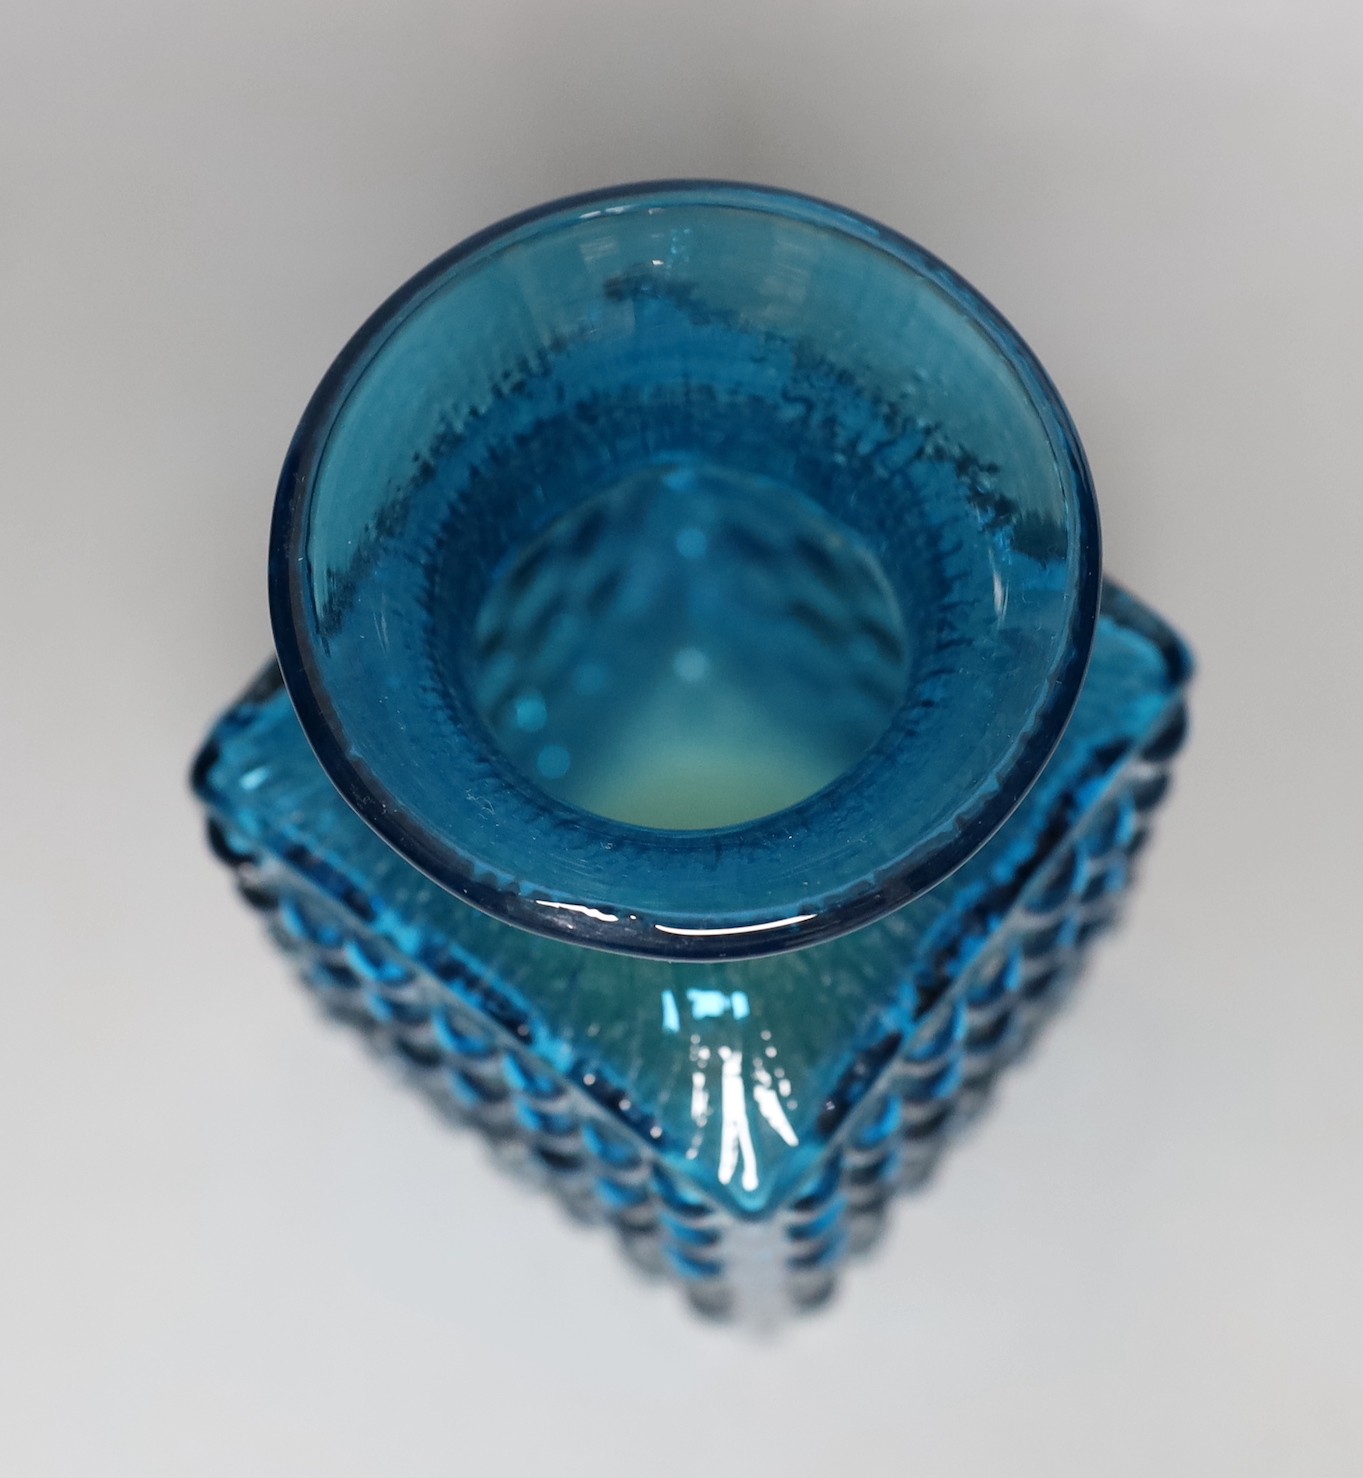 A Whitefriars 'Chess' glass vase, designed by Geoffrey Baxter, pattern number 9817, blue glass, 15cm tall